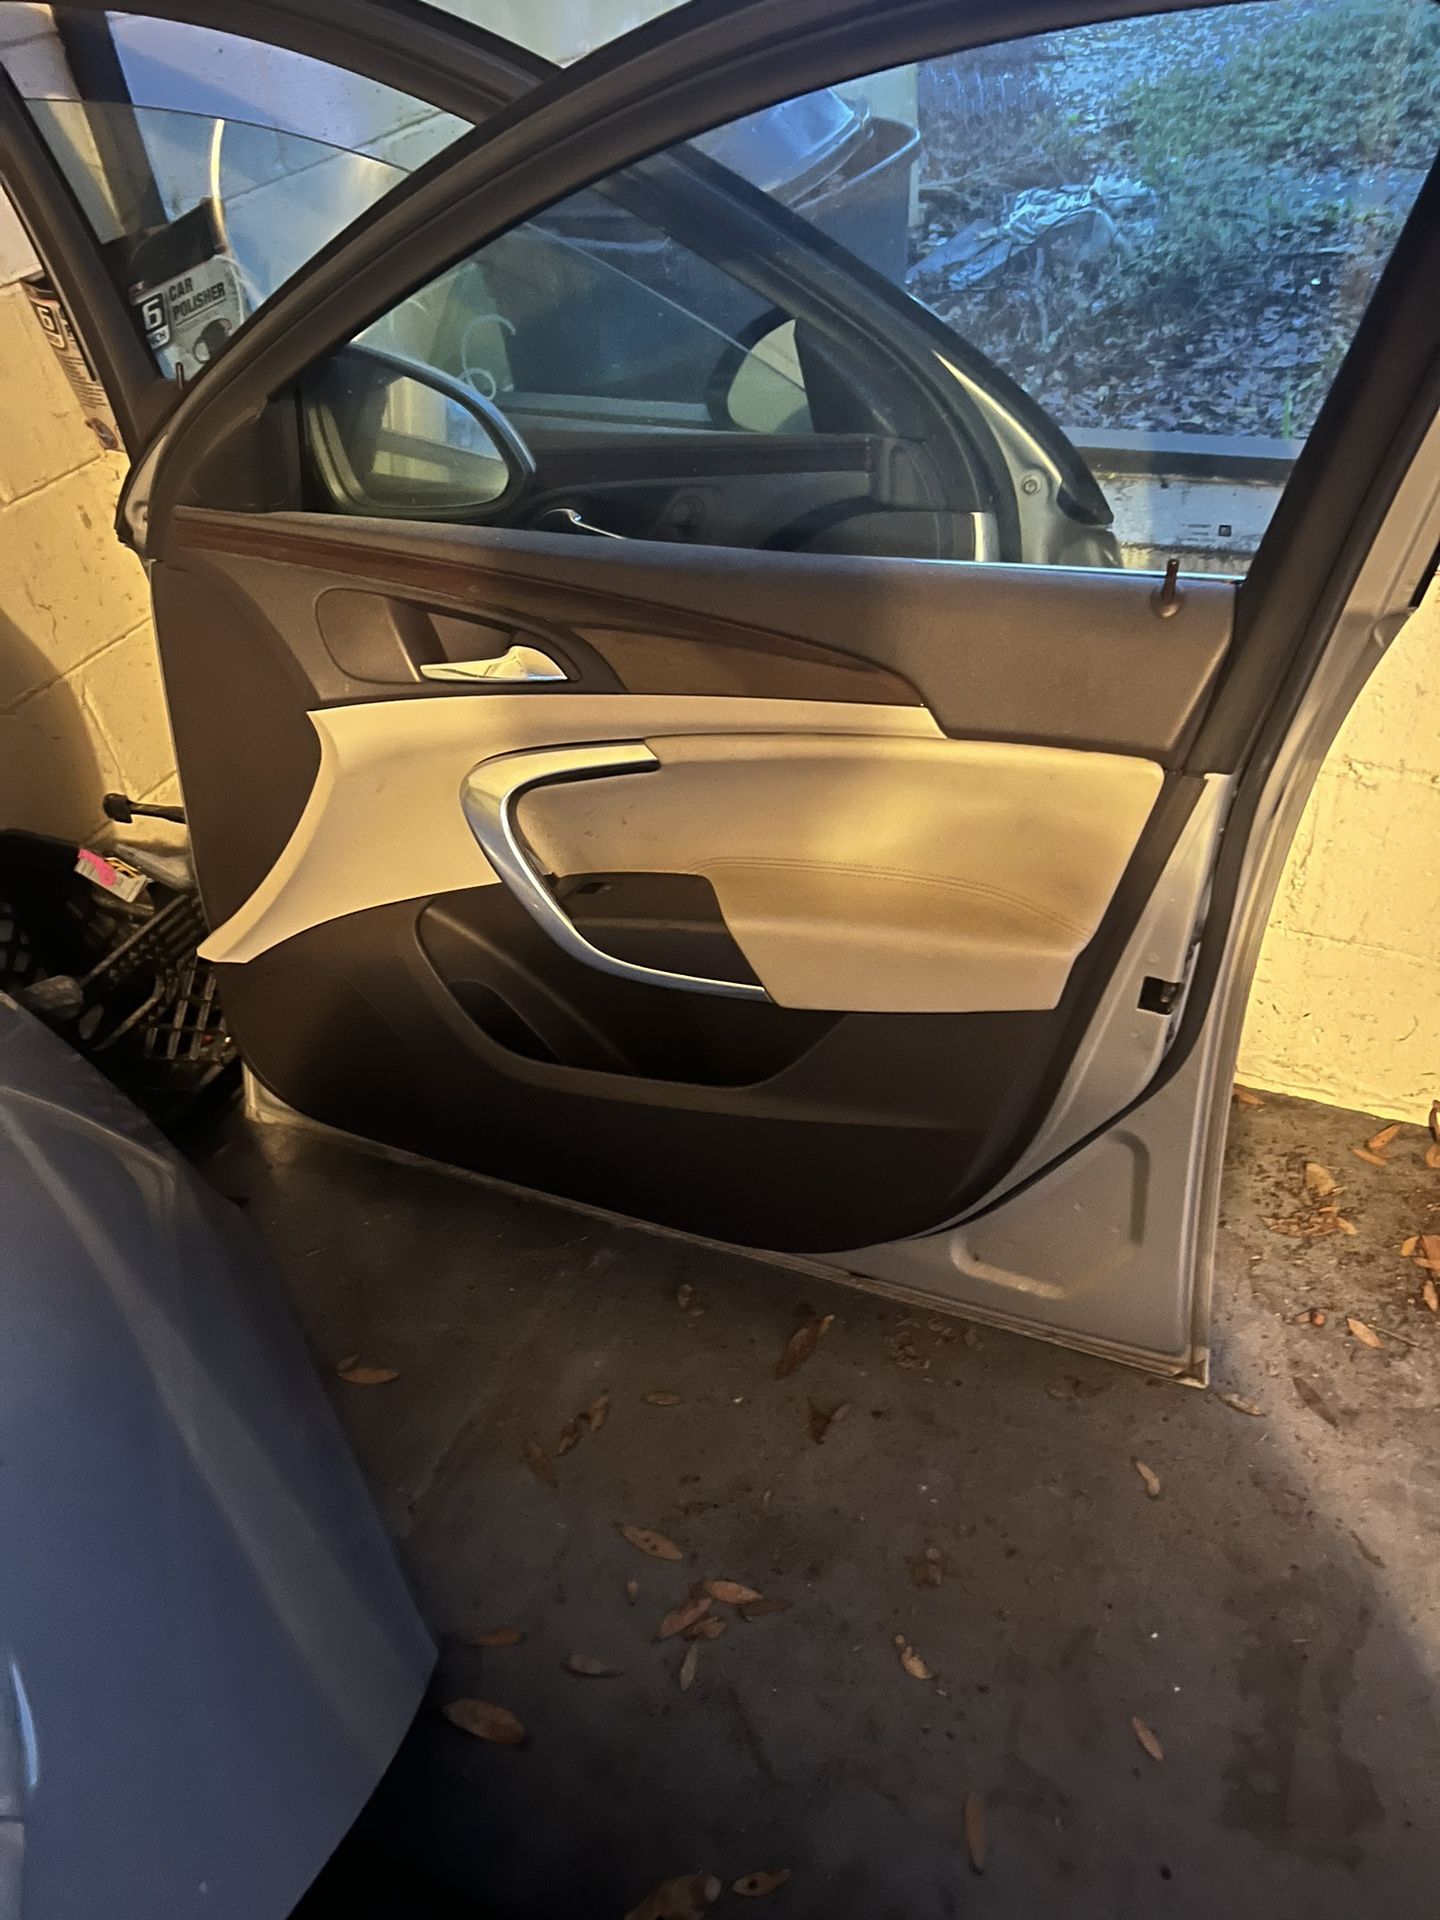 2011 Buick Regal Front And Rear Doors 